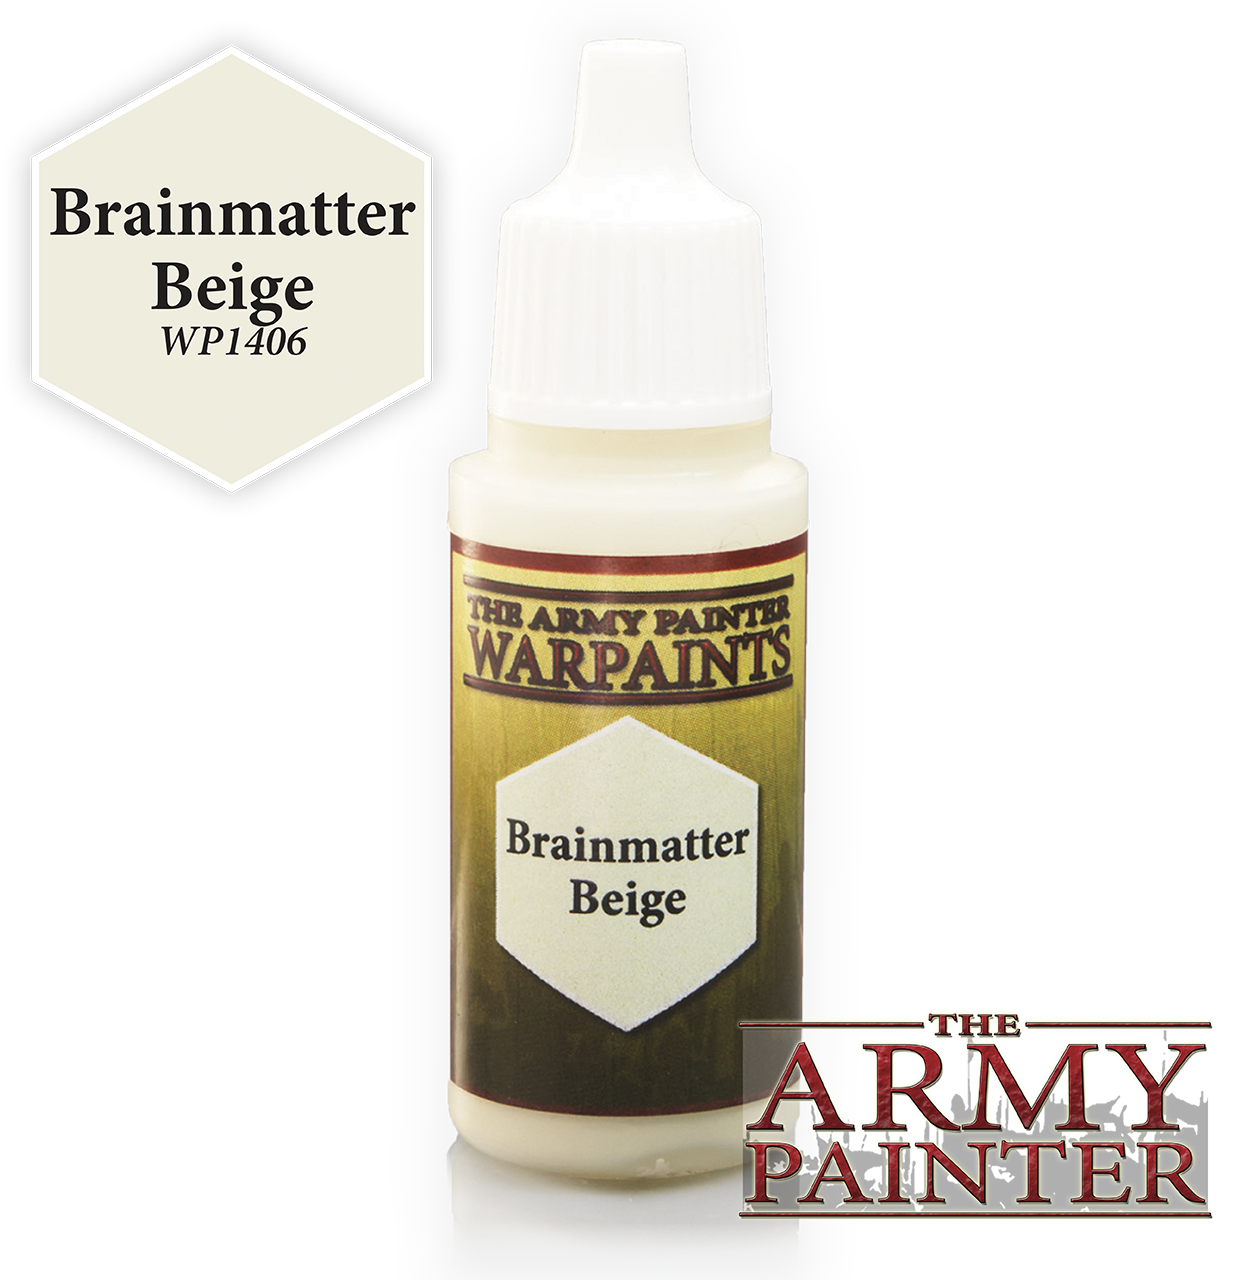 The ARMY PAINTER: Acrylics Warpaint - Brainmatter Beige | Tacoma Games